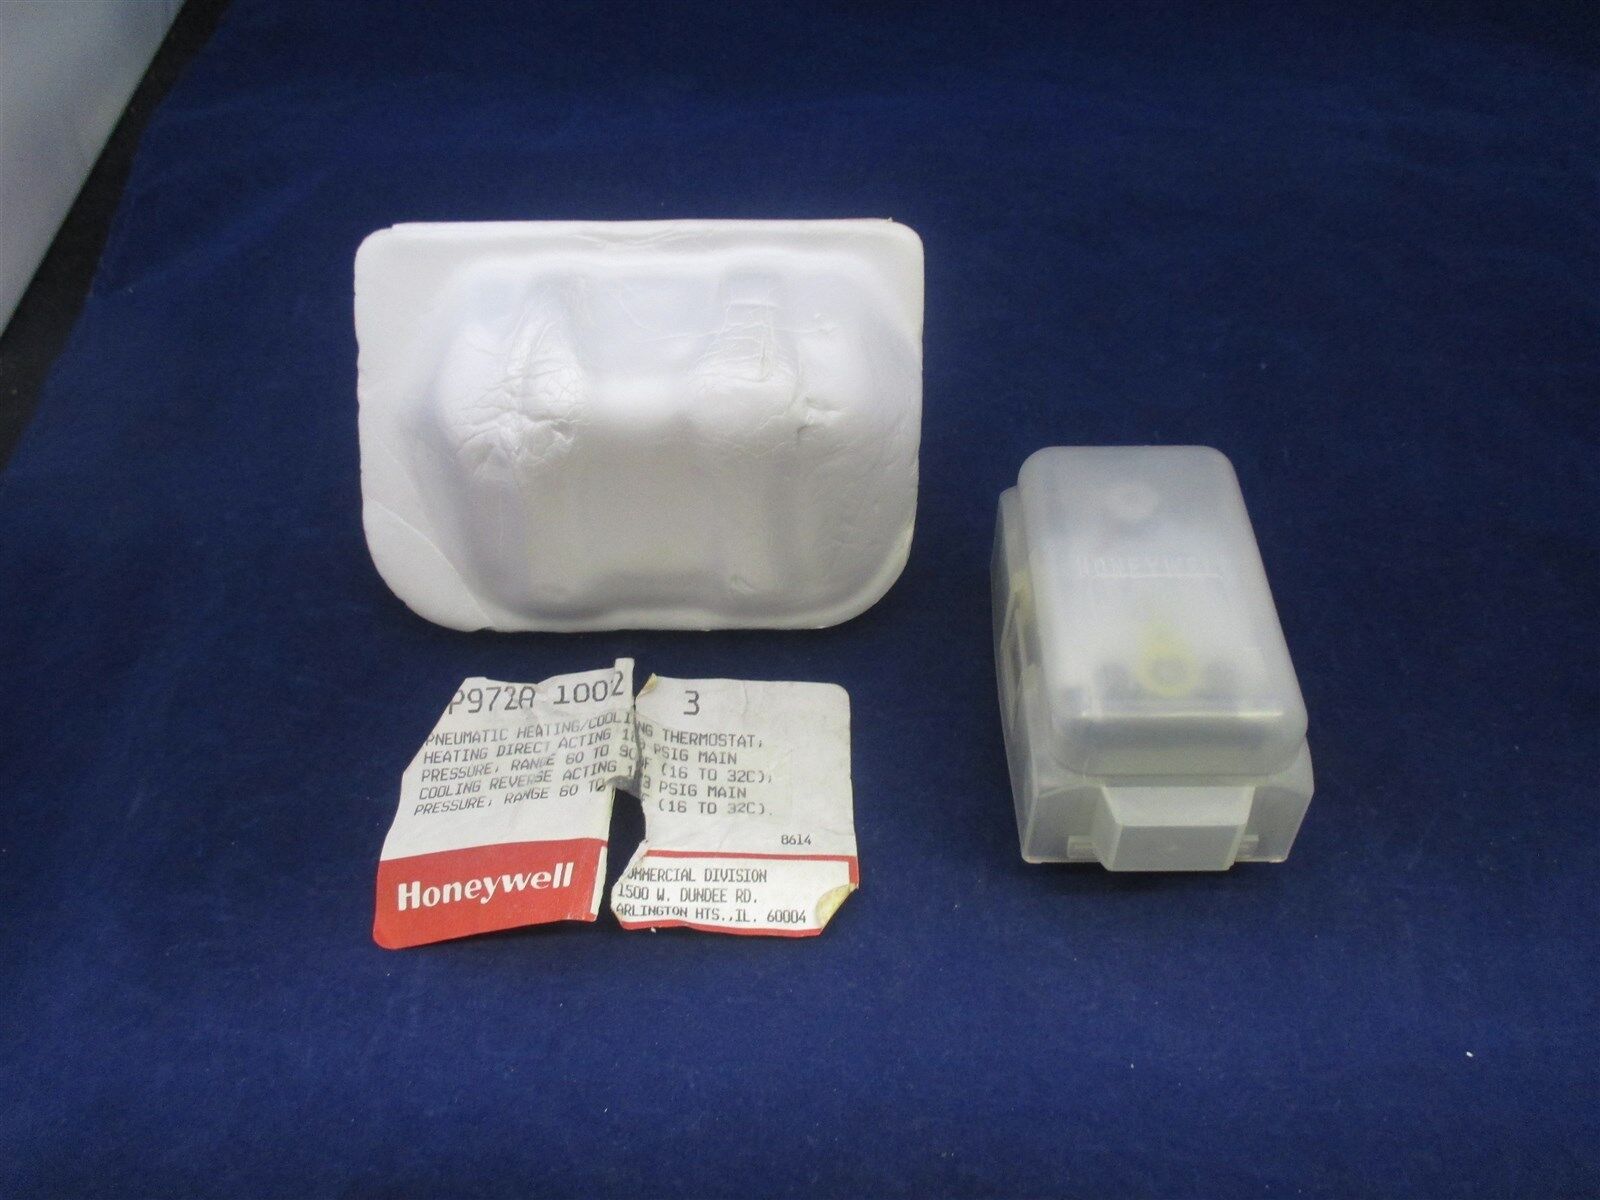 Honeywell TP972A-1002 3 Pneumatic Heating and Cooling Thermostat